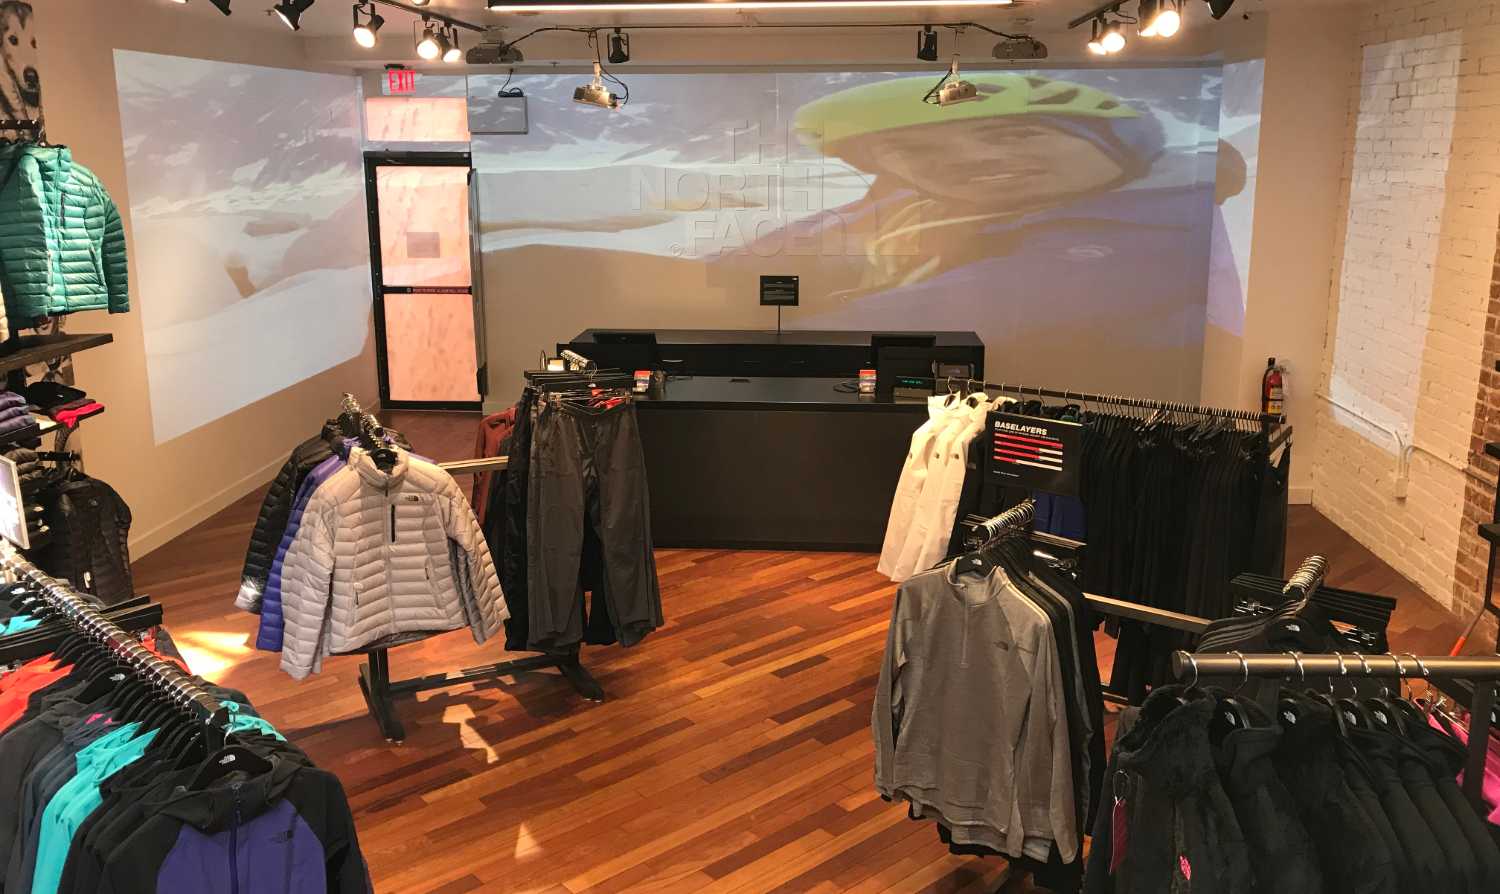 Retail Store Tests Video Wall Concept